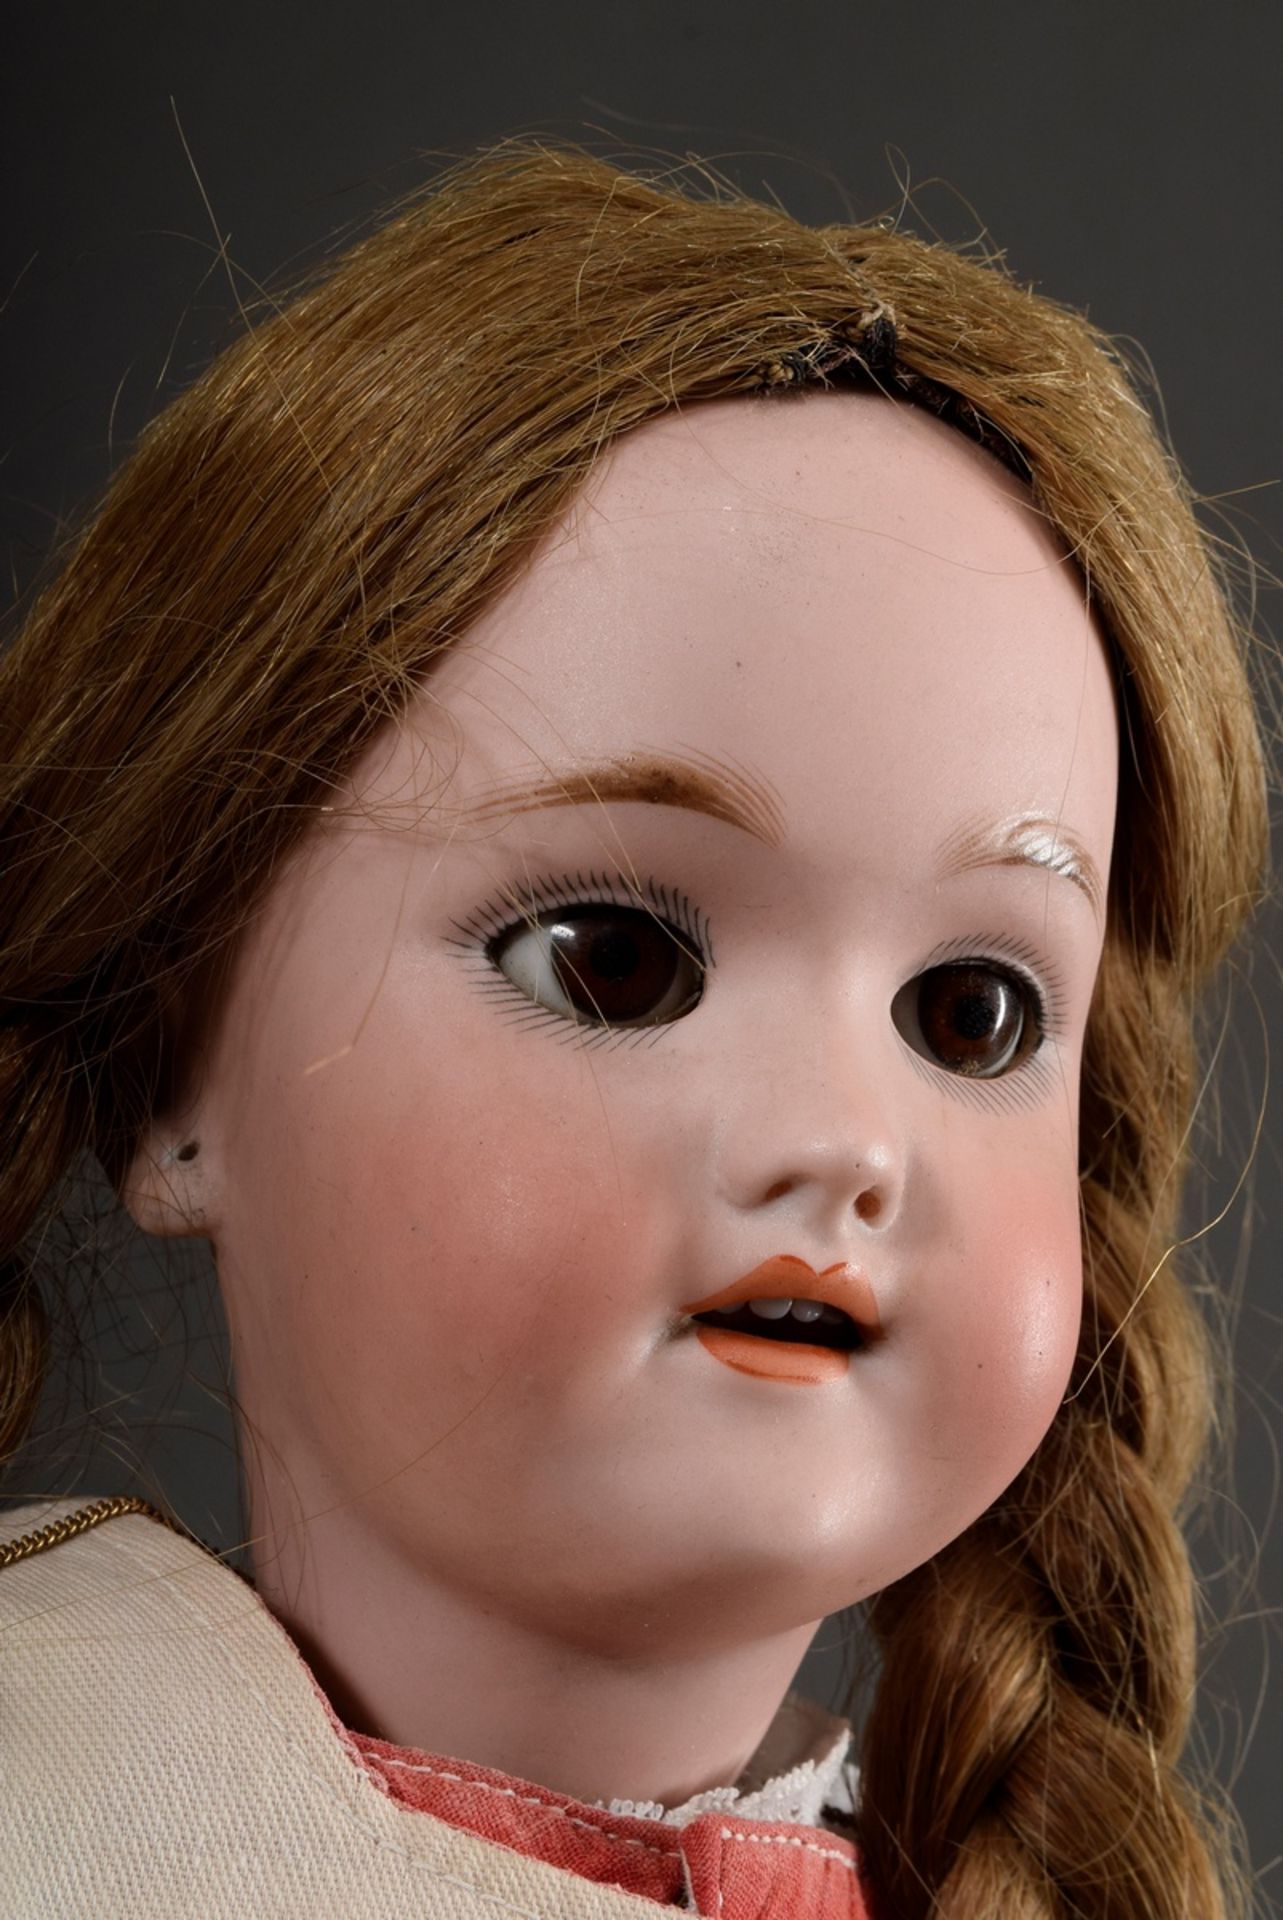 Doll with porcelain crank head and wooden limbed body, dark blond real hair wig, brown glass sleepi - Image 8 of 11